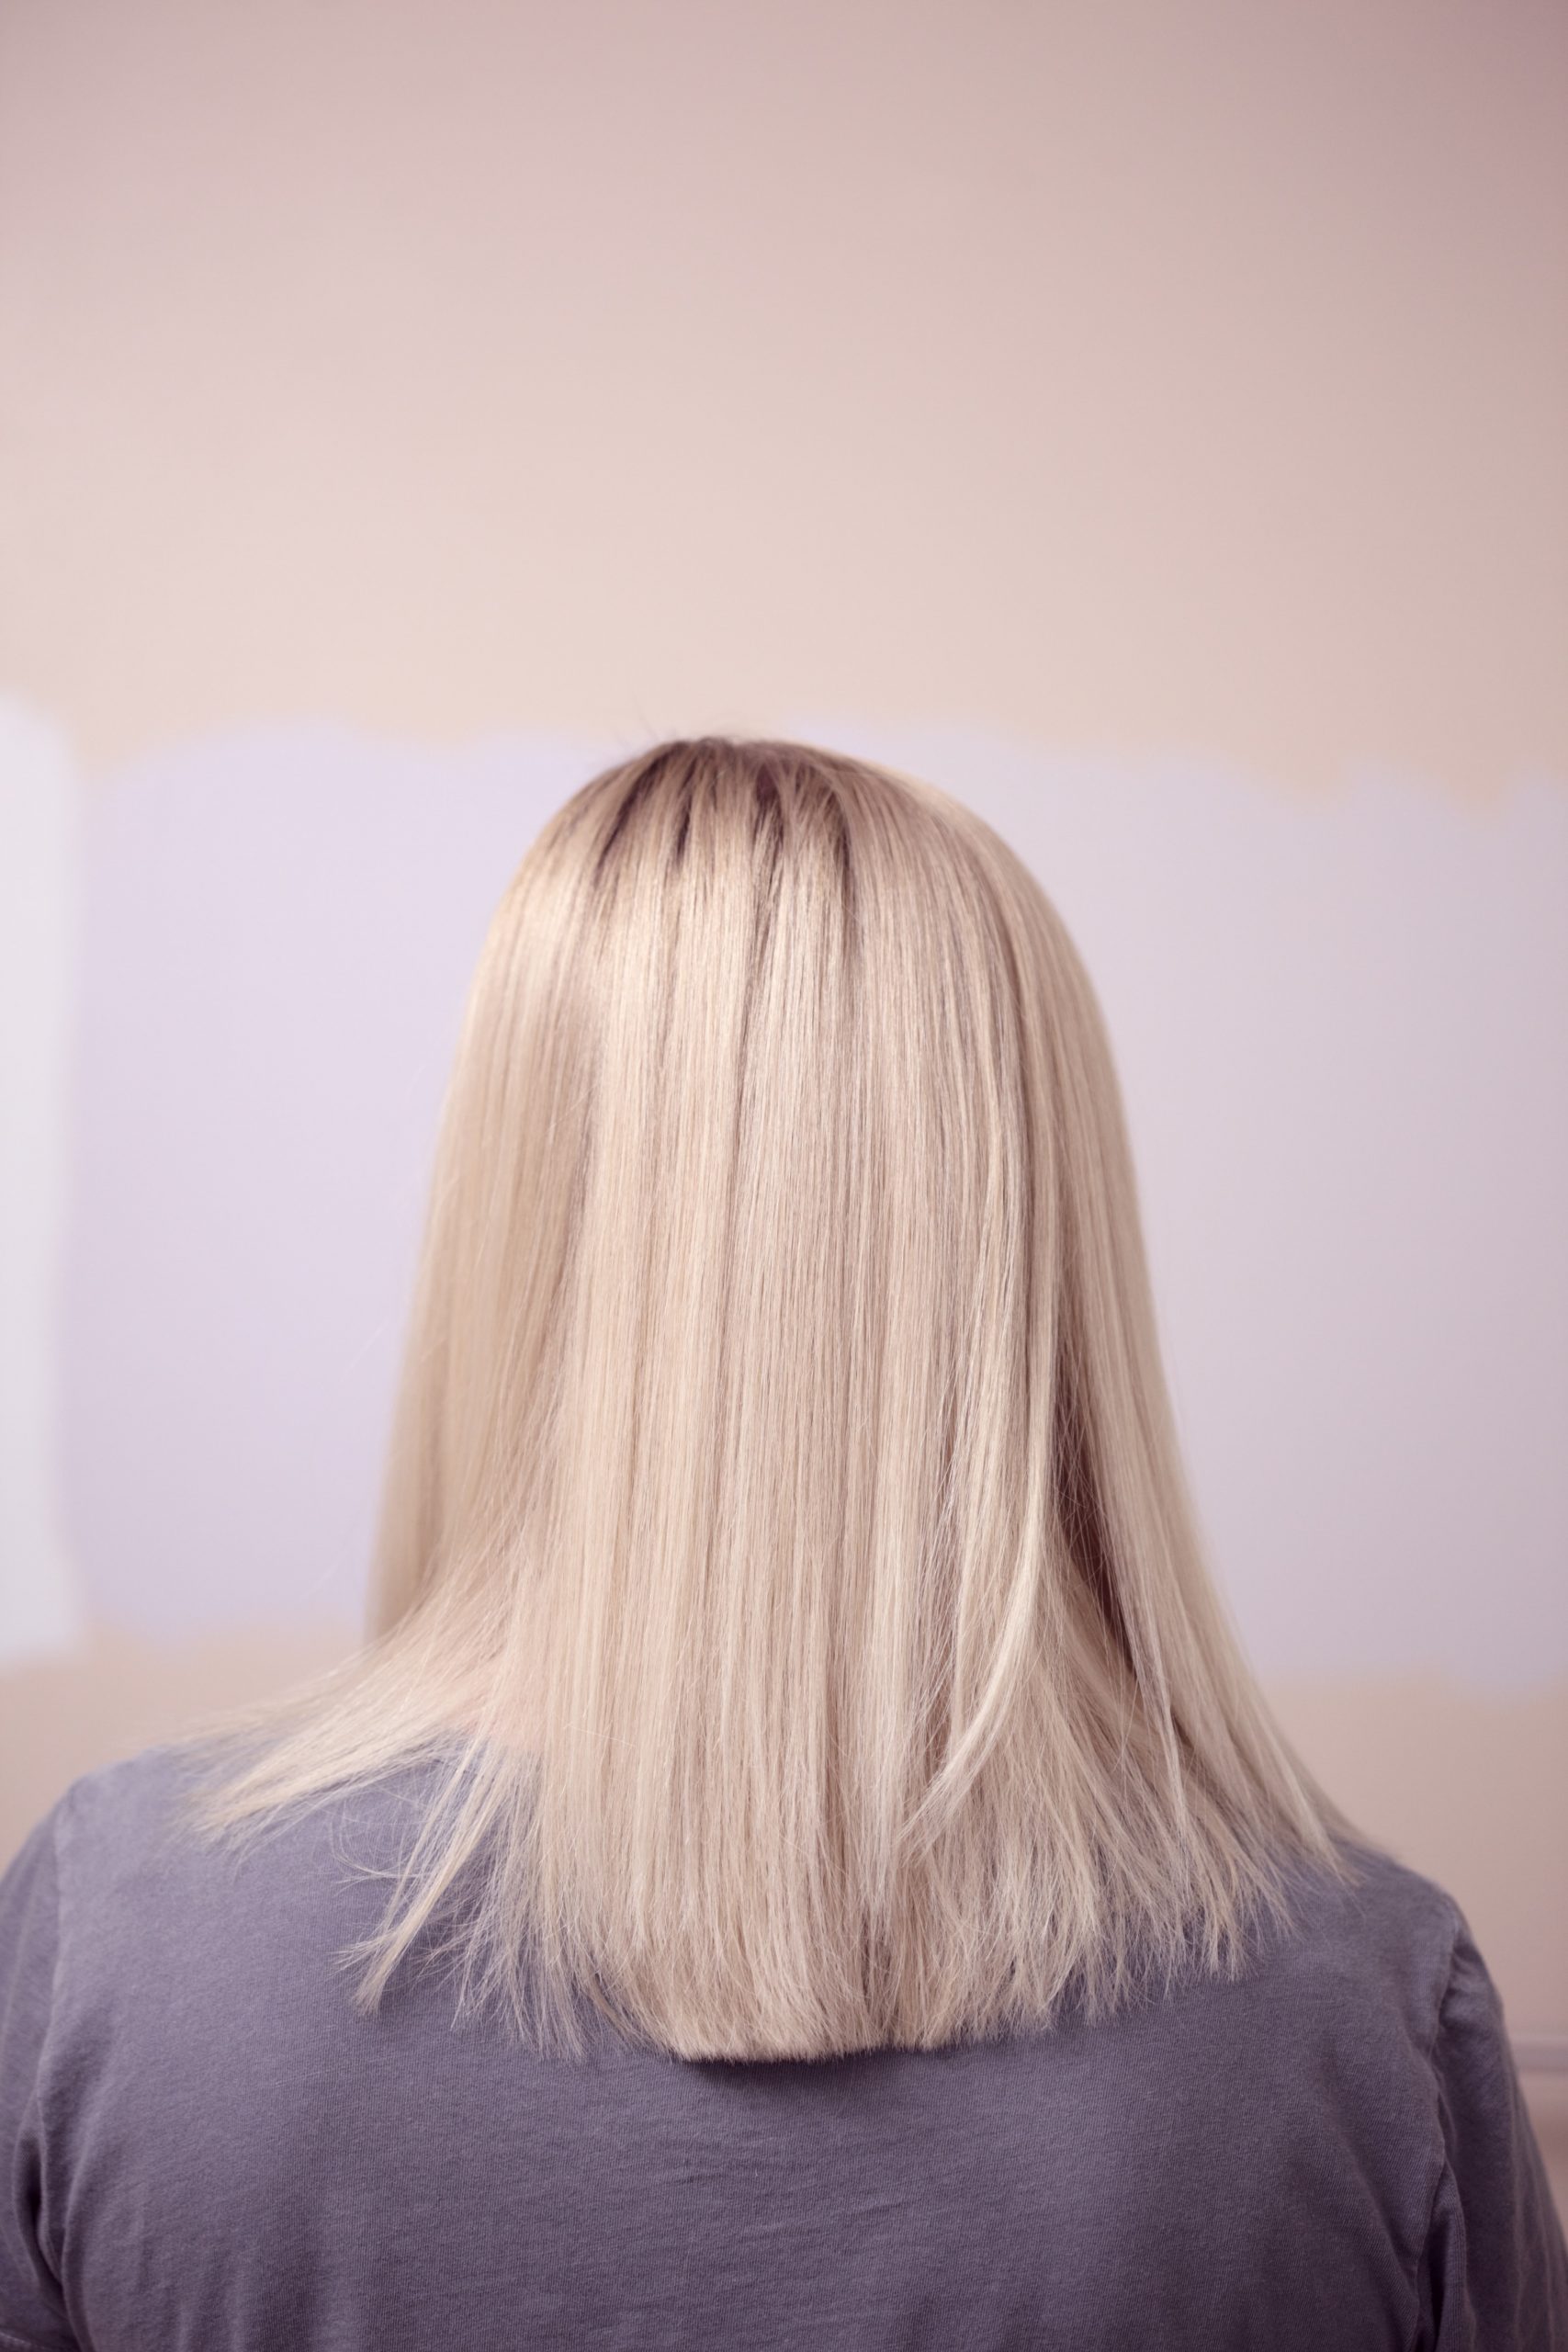 Color safe shampoo benefits blond colored hair